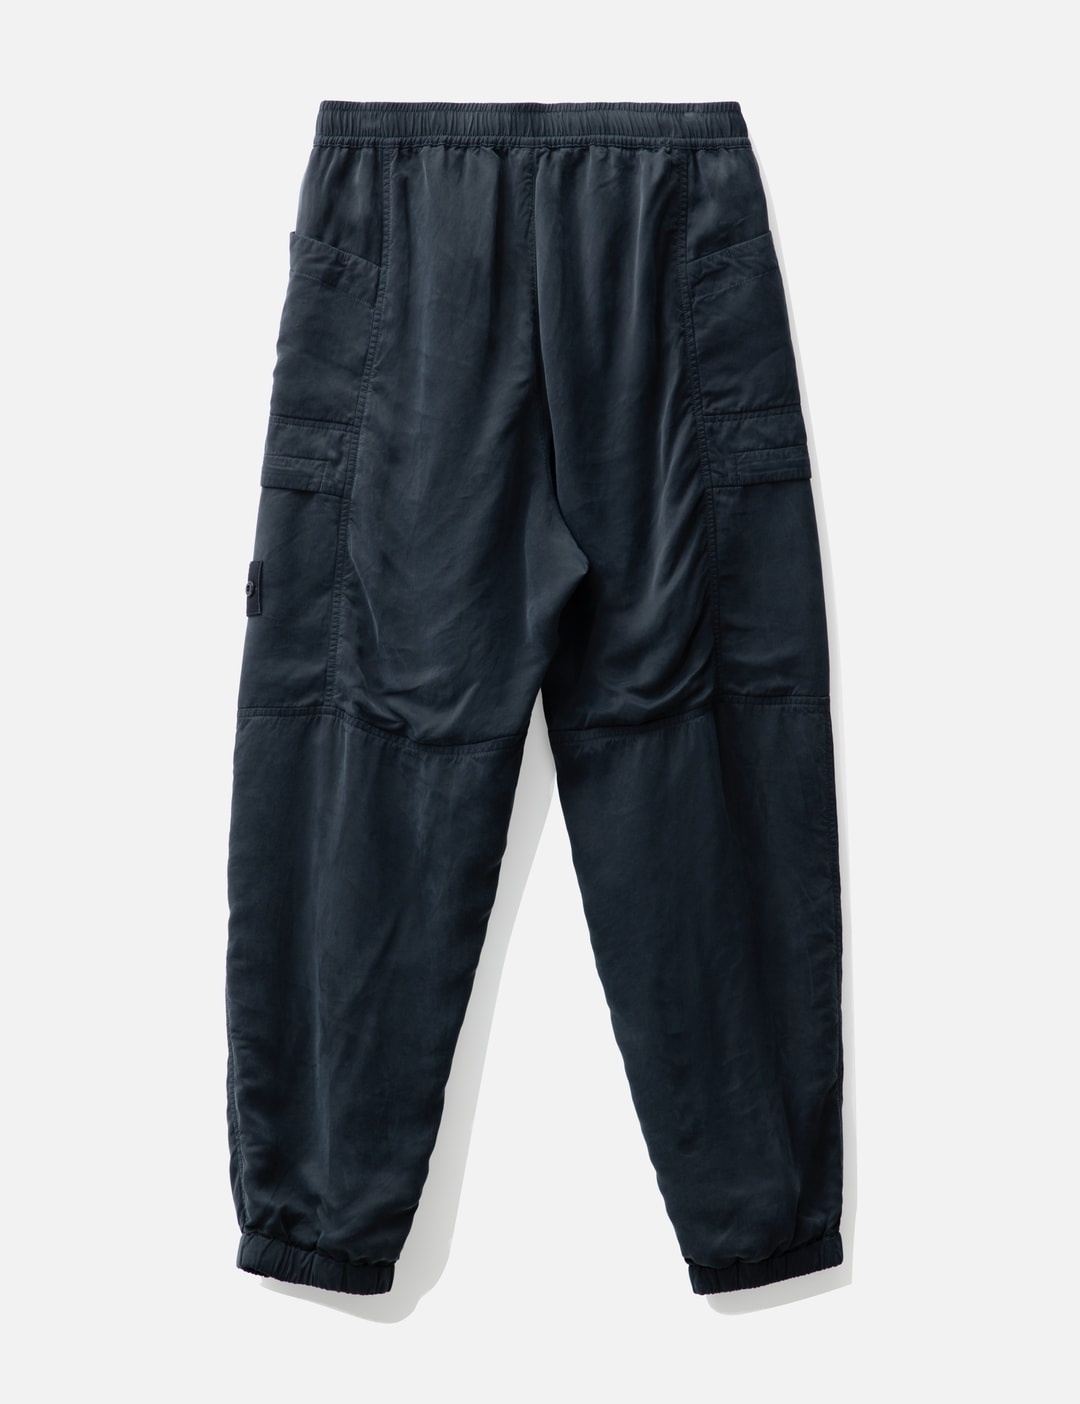 GHOST PIECE LOOSE FIT CARGO PANTS - 2